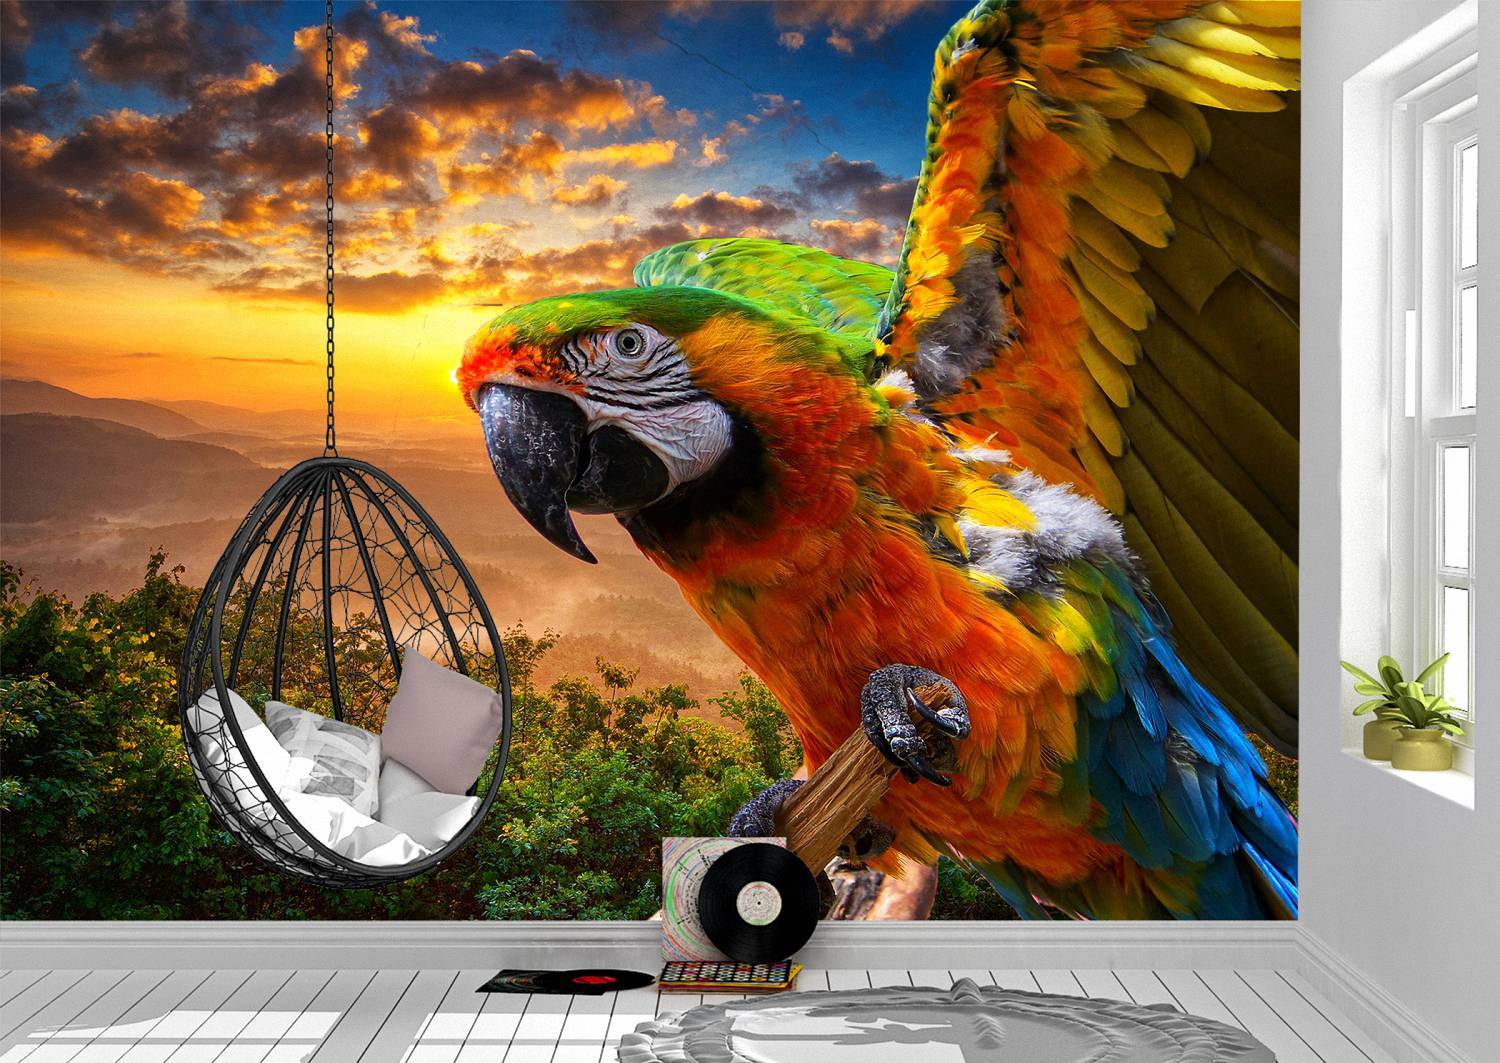 Flying Colorful Parrot Wall Mural Photo Wallpaper UV Print Decal Art Décor